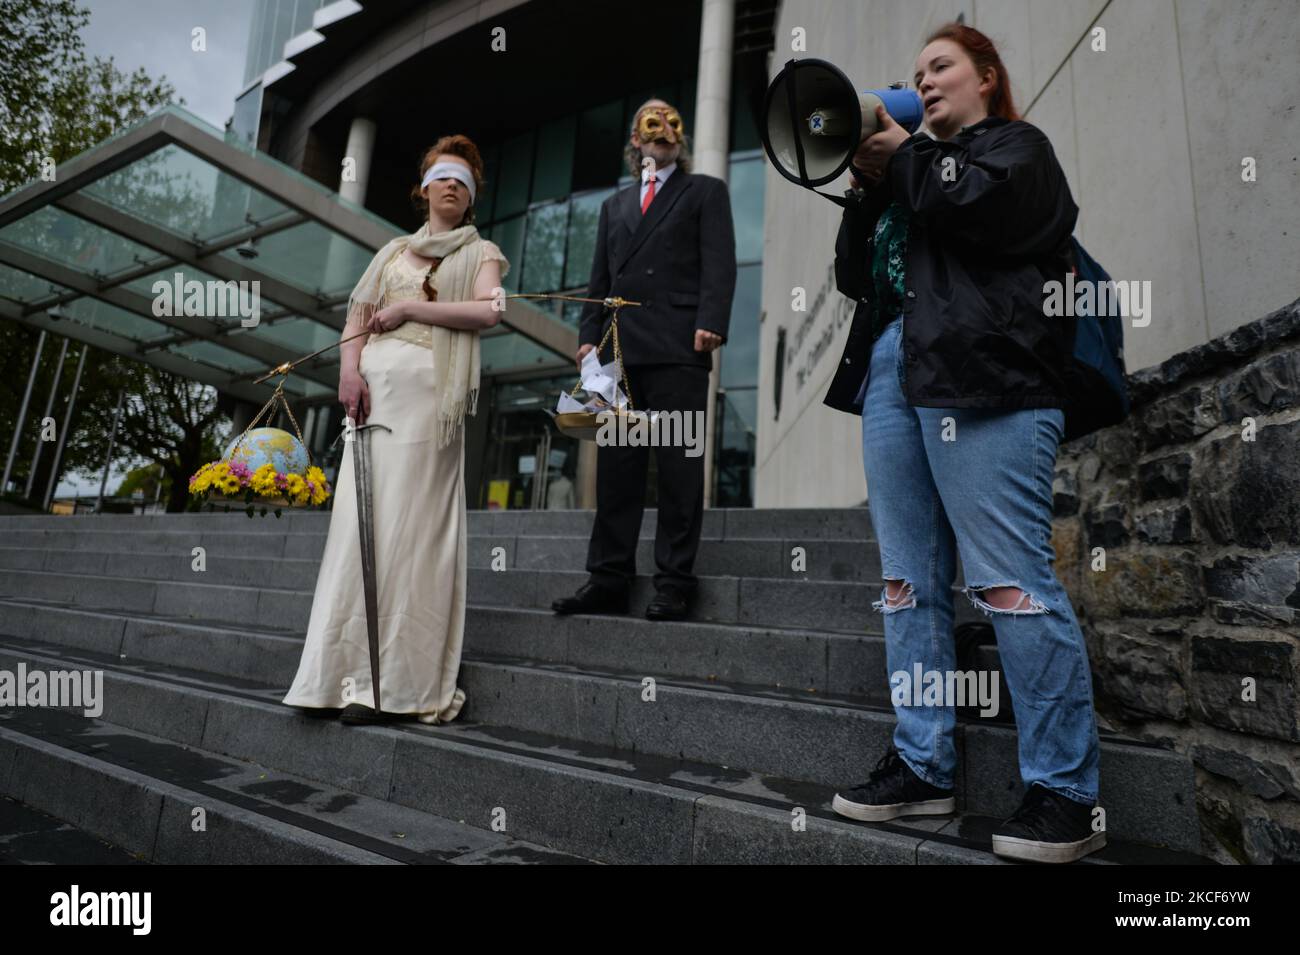 Orla Murphy, addresses the media outside the Criminal Court of Justice in Dublin. Extinction Rebellion activists staged a theatrical protest on the steps of the Criminal Court of Justice in Dublin to show the injustice of climate inaction as 20-year-old Orla Murphy, a climate activist, appears in court for criminal damages. On Tuesday, May 25, 2021, in Dublin, Ireland. (Photo by Artur Widak/NurPhoto) Stock Photo